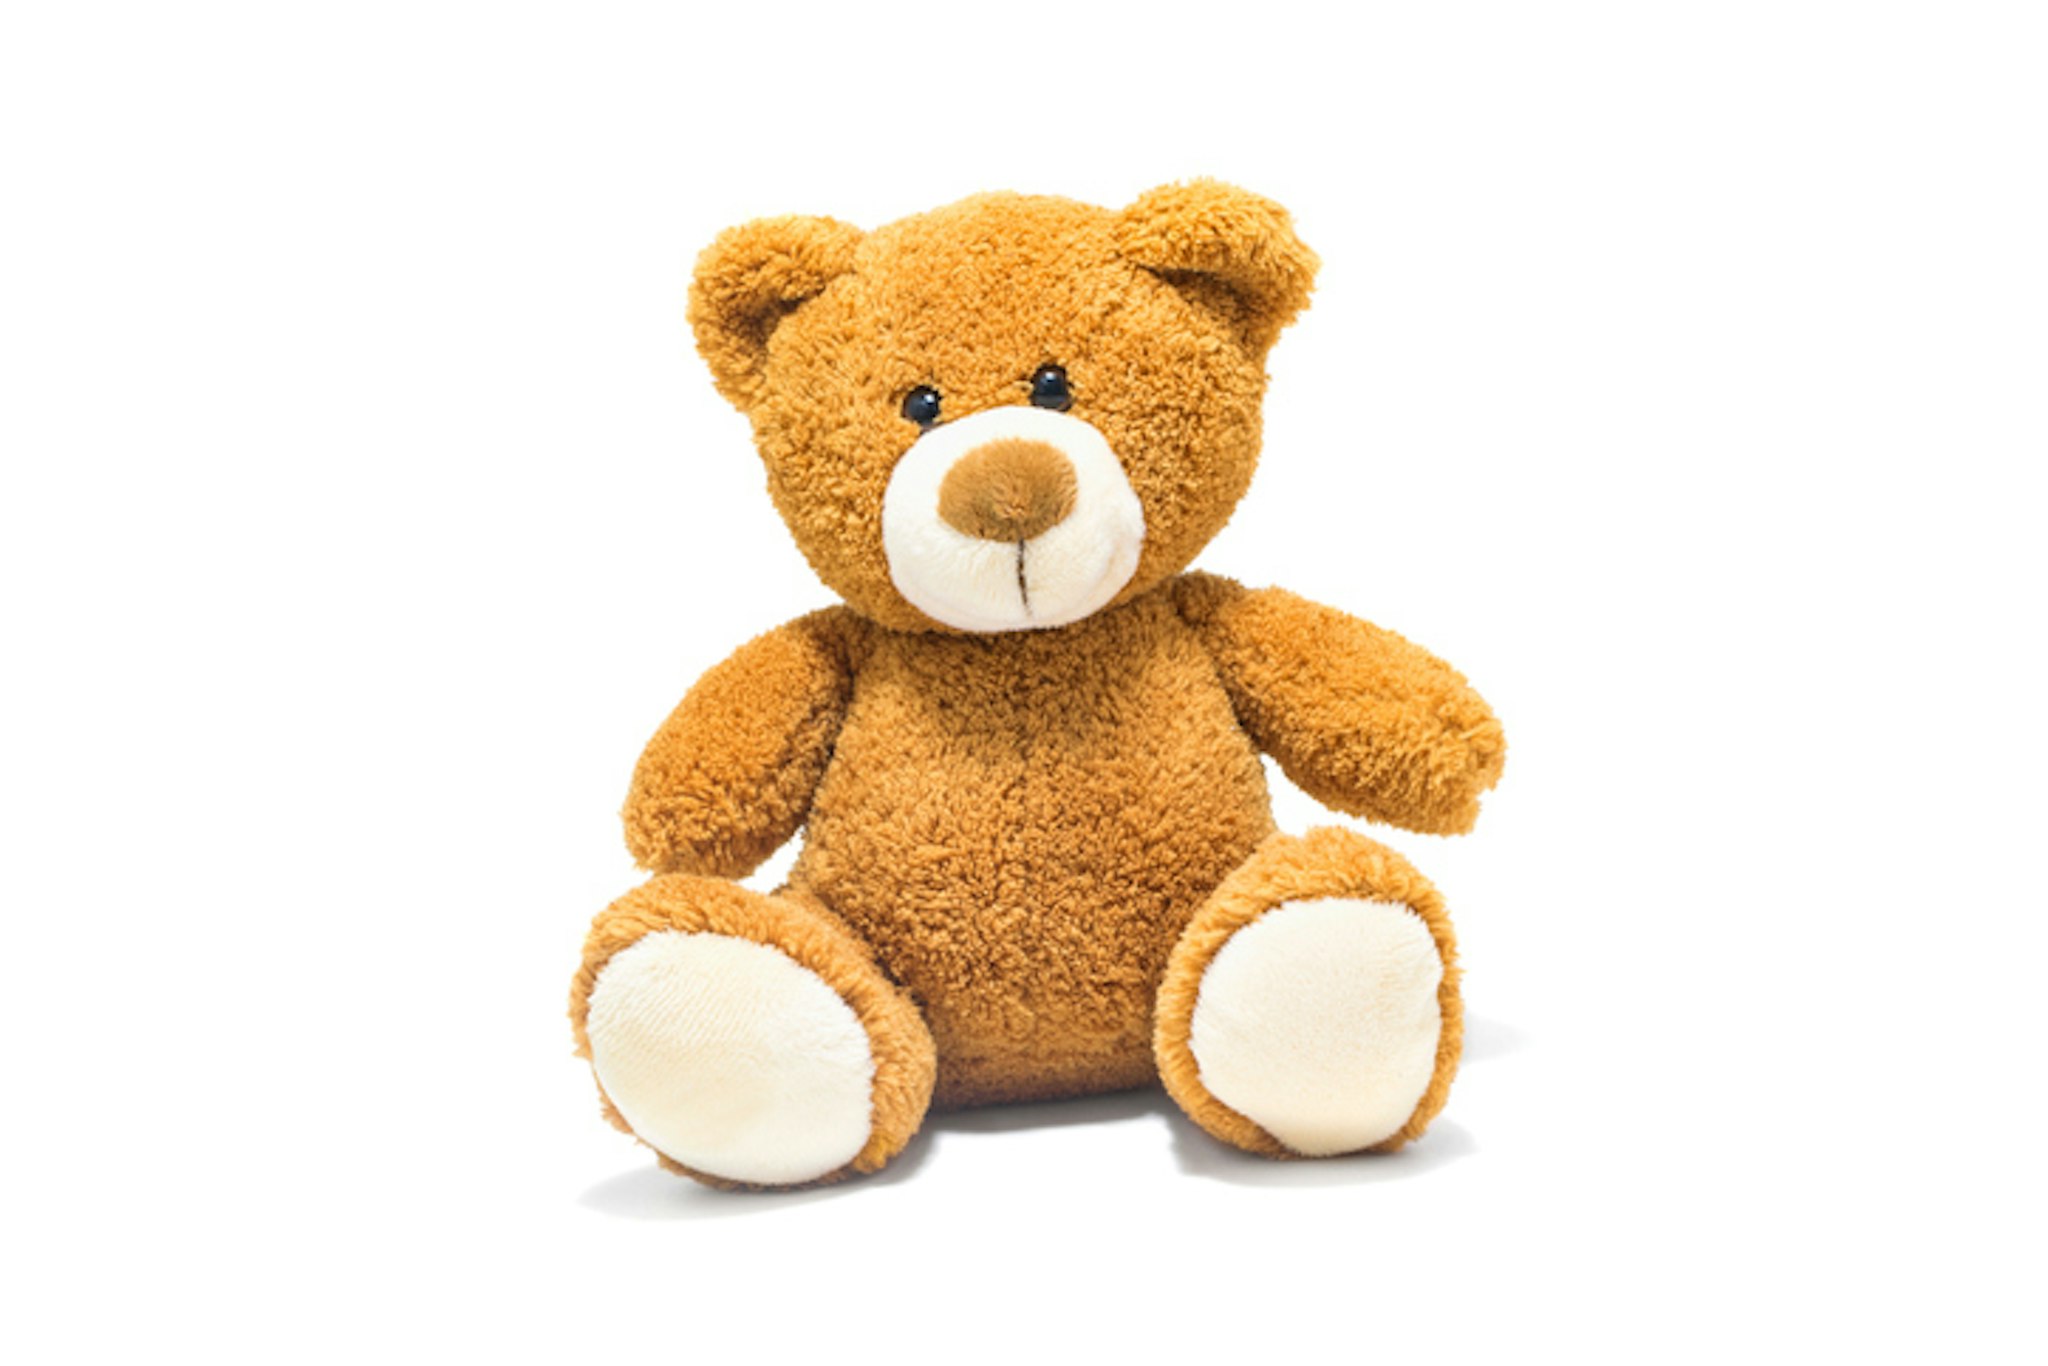 Brown Stuffed Toy Over White Background - stock photo